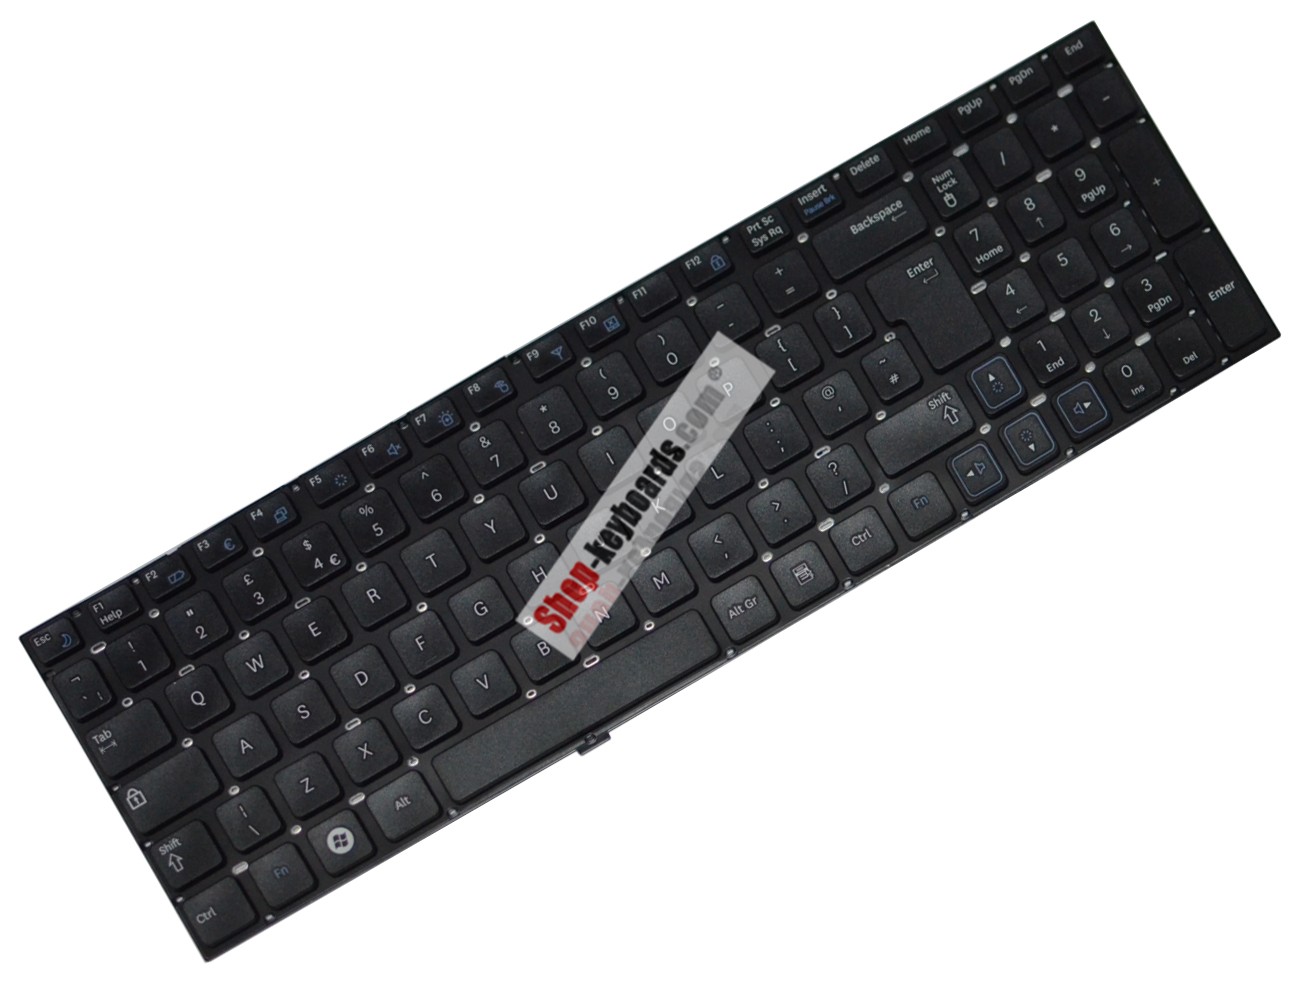 Samsung V123060AS1US Keyboard replacement